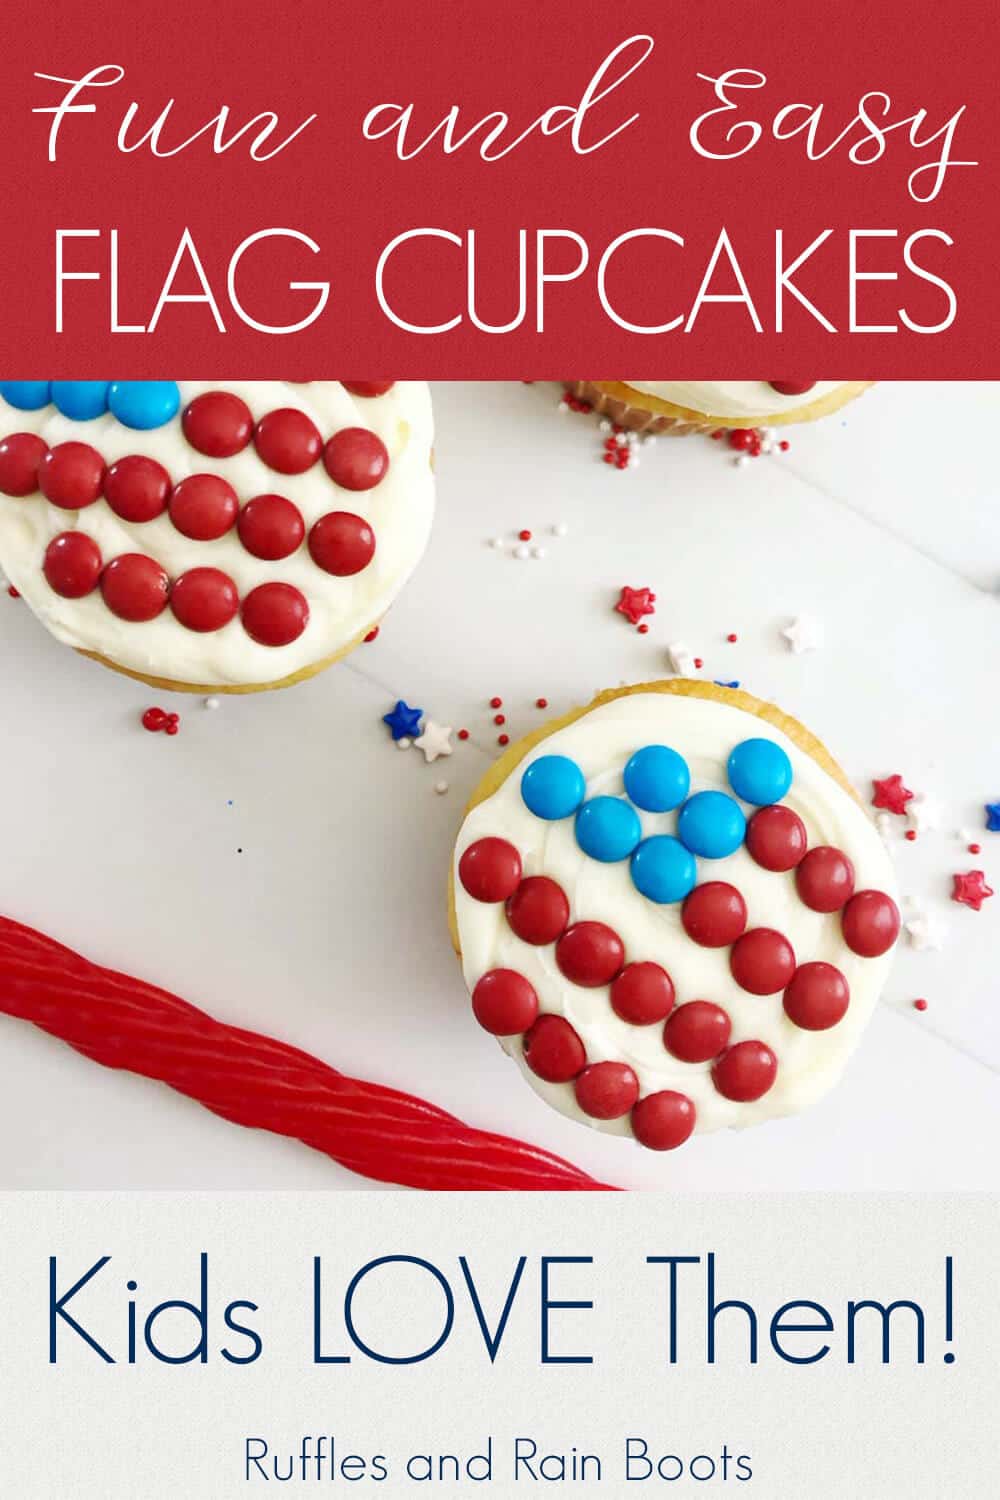 overhead view of 3 flag cupcakes, white cupcakes decorated with a flag made of candy, on a white background with text which reads fun and easy flag cupcakes and Kids LOVE them!